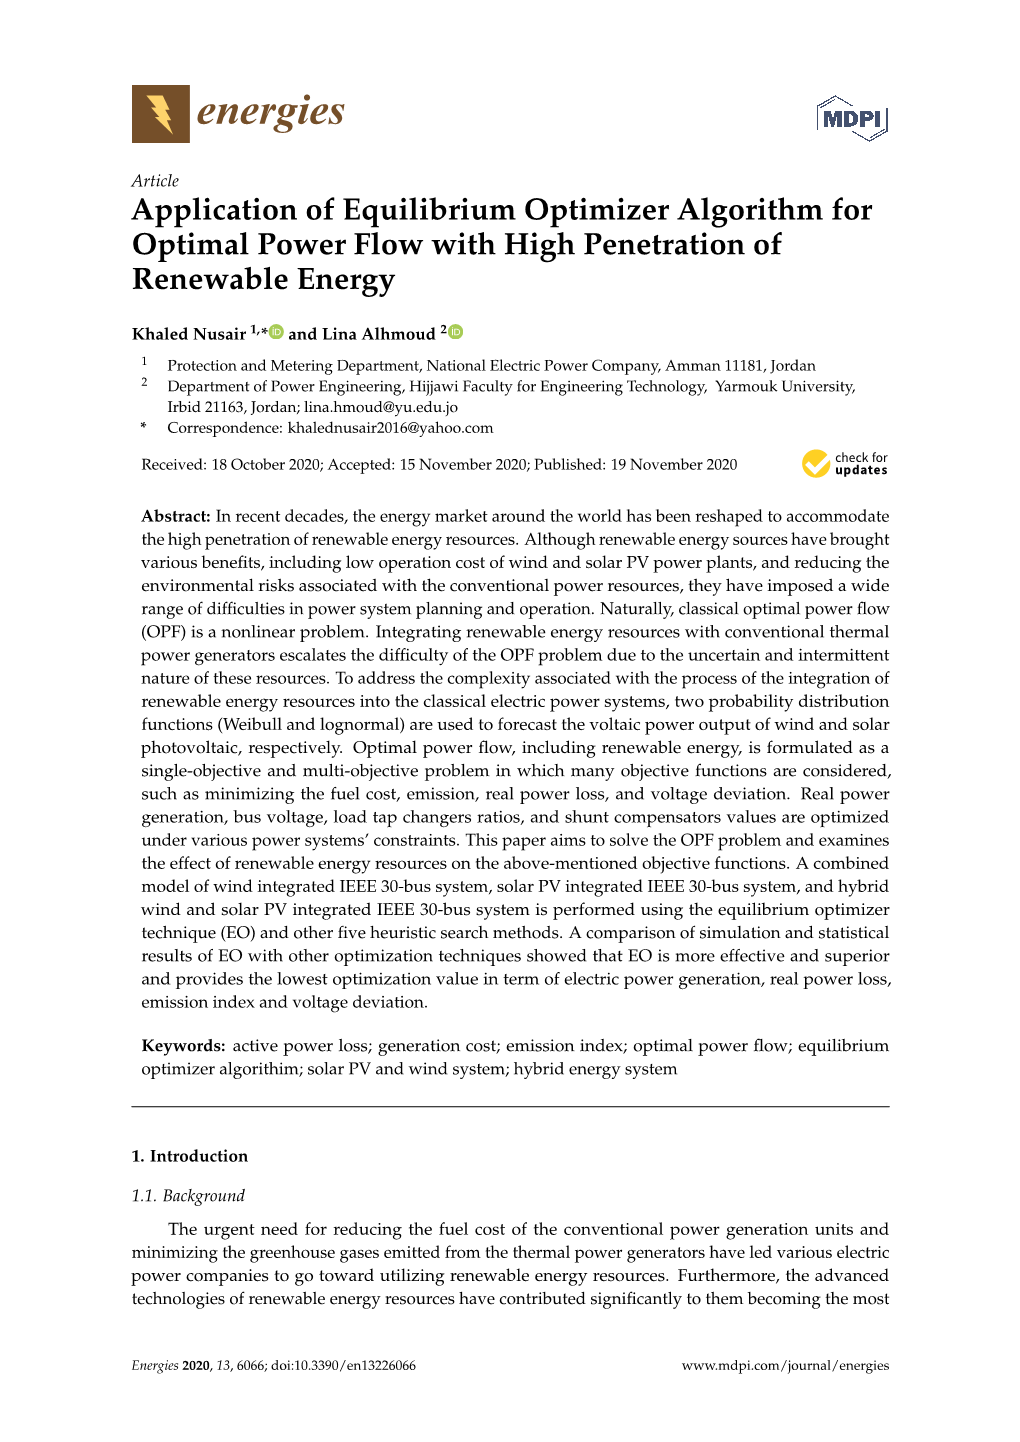 Application of Equilibrium Optimizer Algorithm for Optimal Power Flow with High Penetration of Renewable Energy